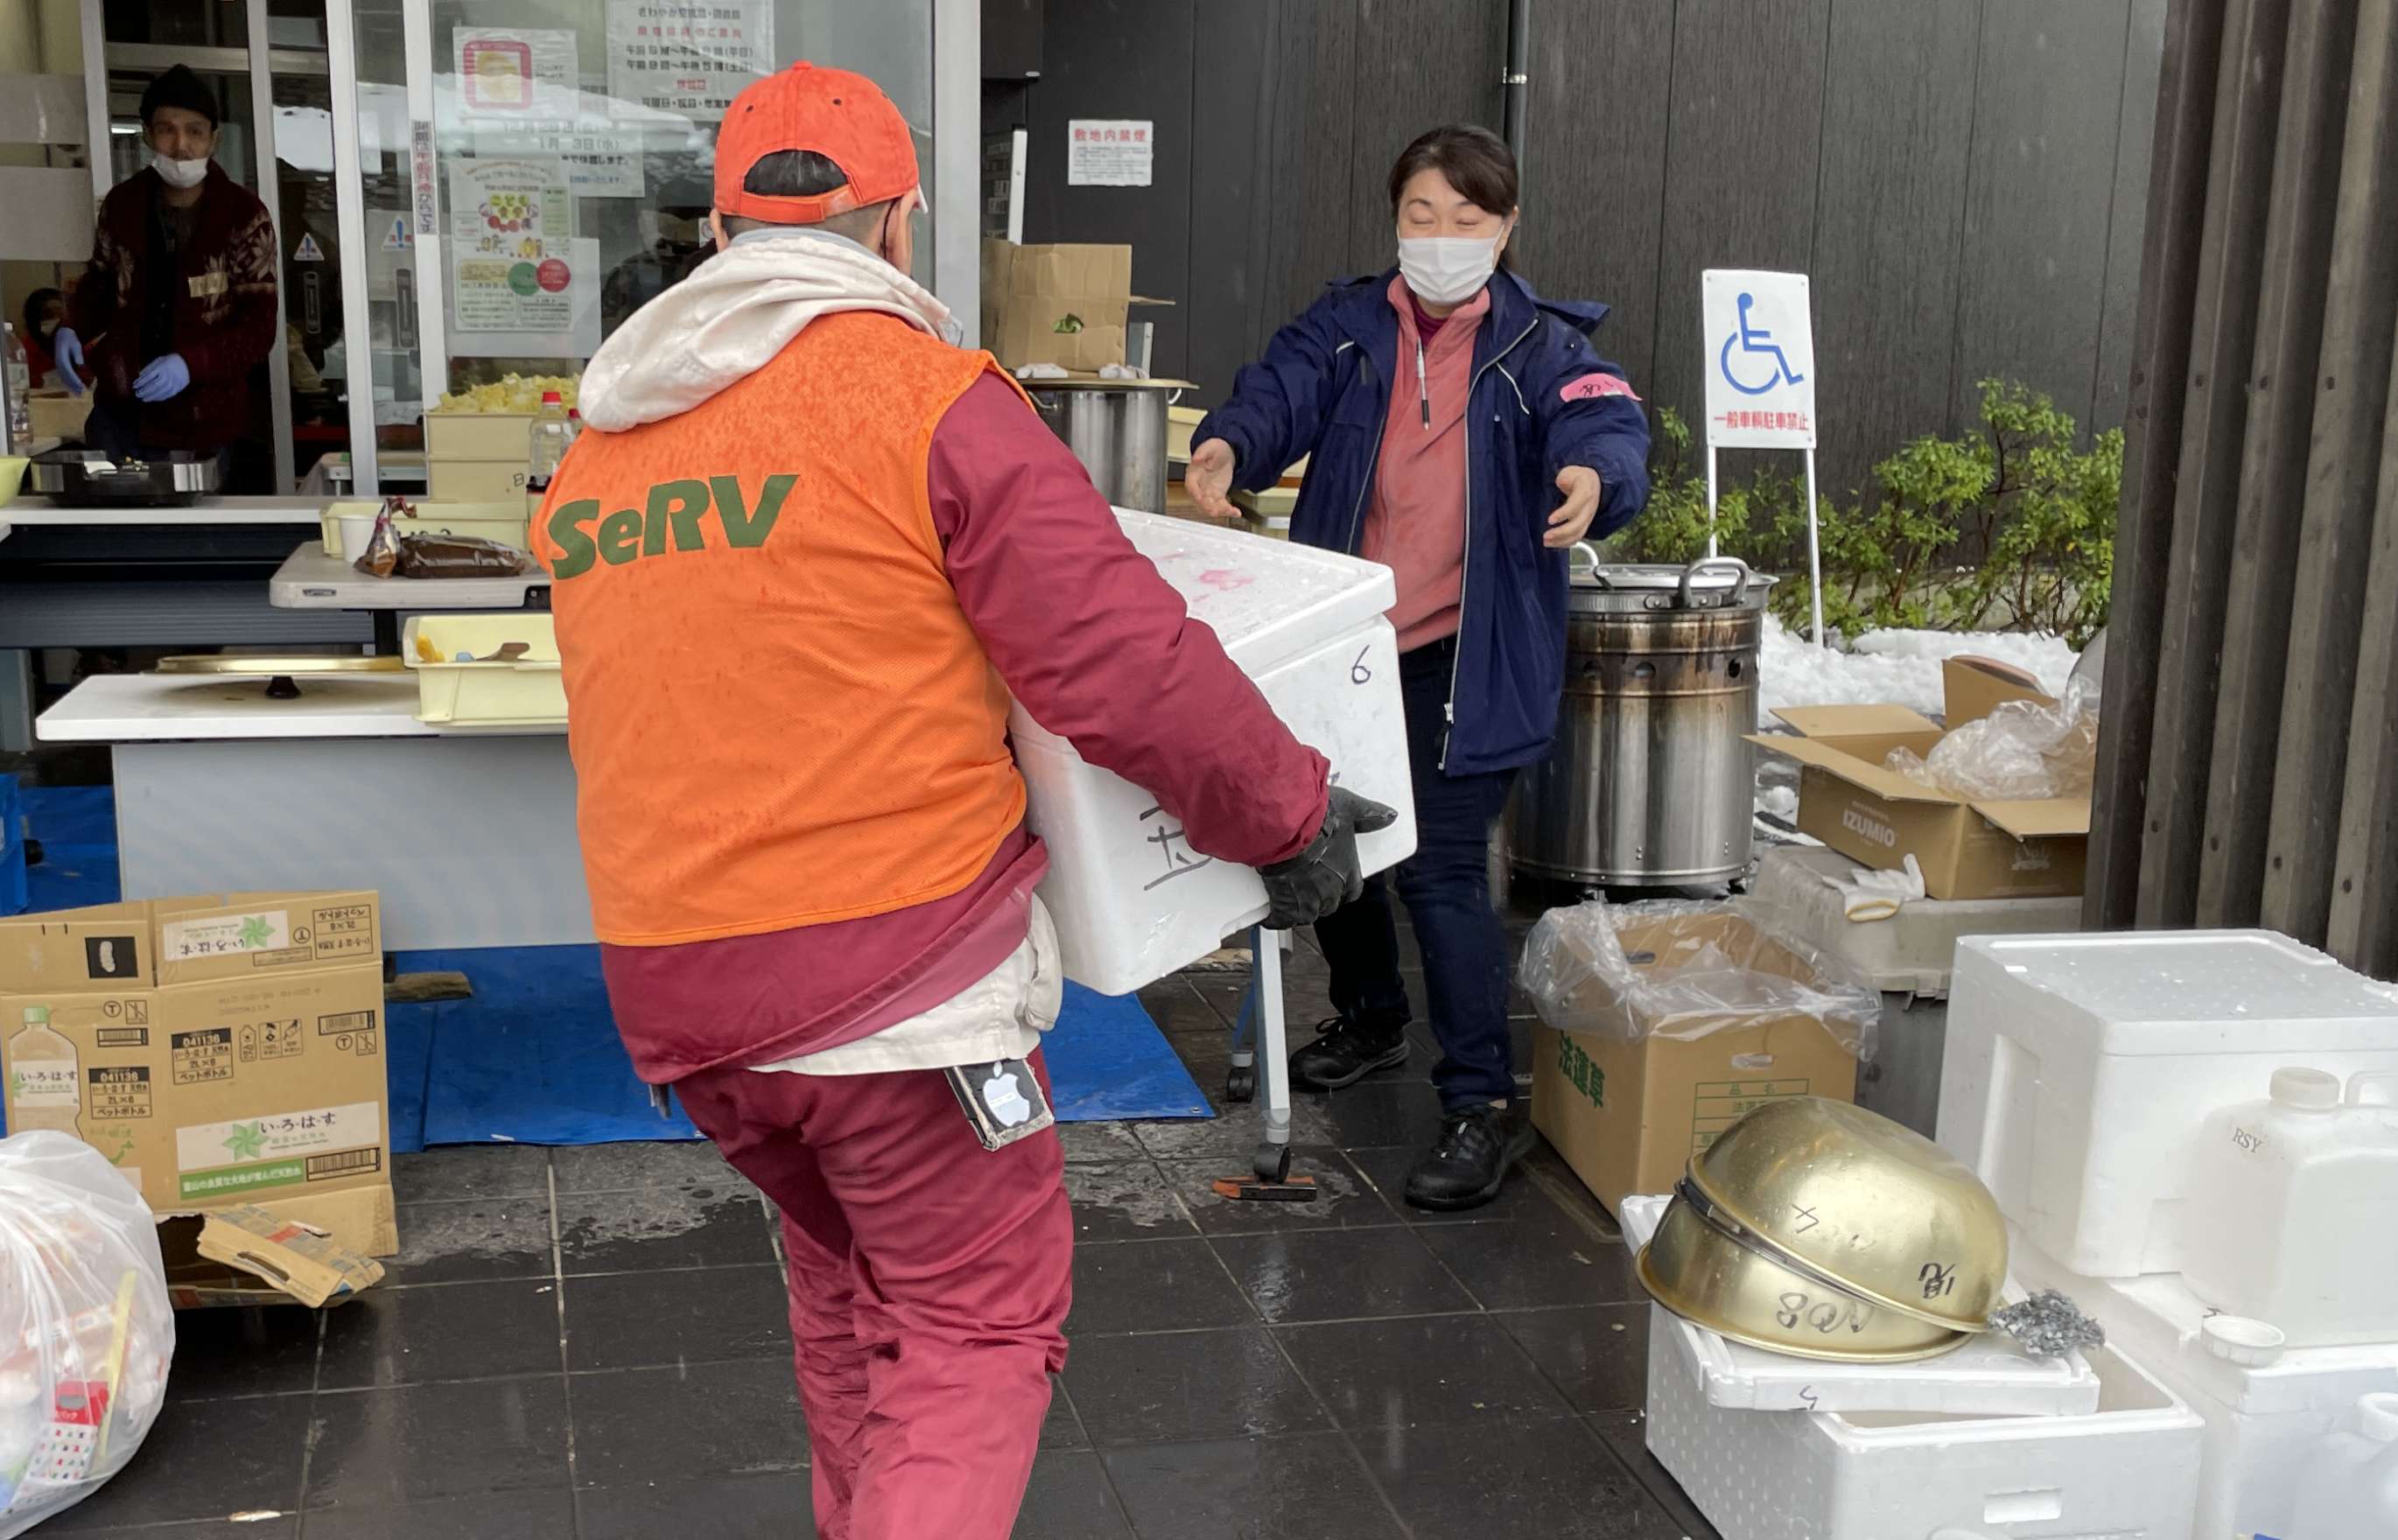 Two men wearing medical masks and wearing orange hi-vis vests with the SeRV logo on them deliver boxes of supplies to a makeshift station for distribution of relief supplies set up atop blue tarps in the entrance to a building; tiled, high peaked Japanese rooftops are visible in the background.